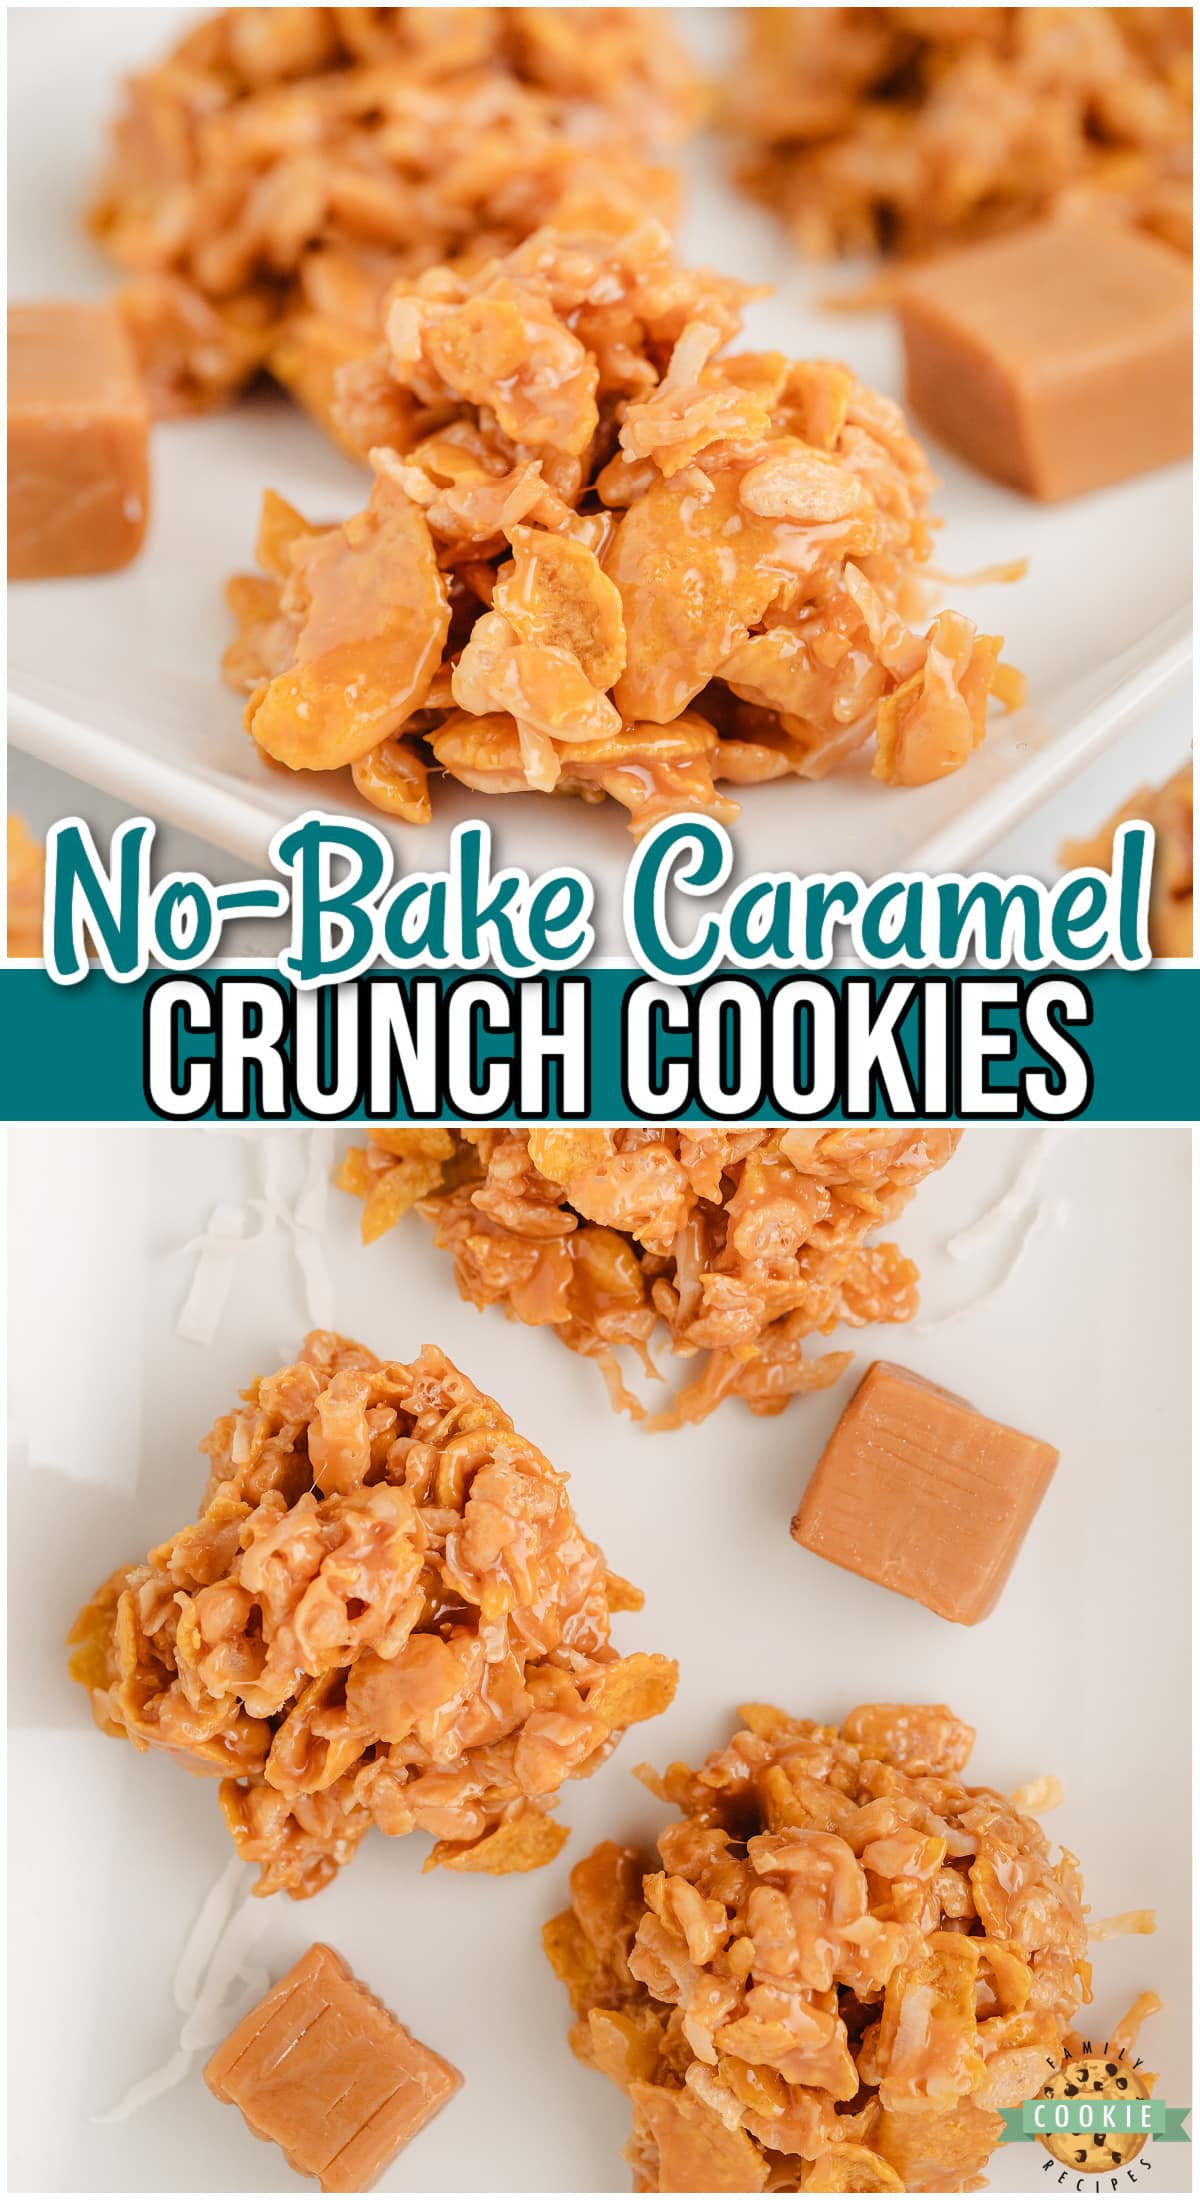 No-Bake Caramel Crunch Cookies combine cornflakes, rice krispies & coconut with soft caramel for a sweet & crunchy cookie that's made in minutes!